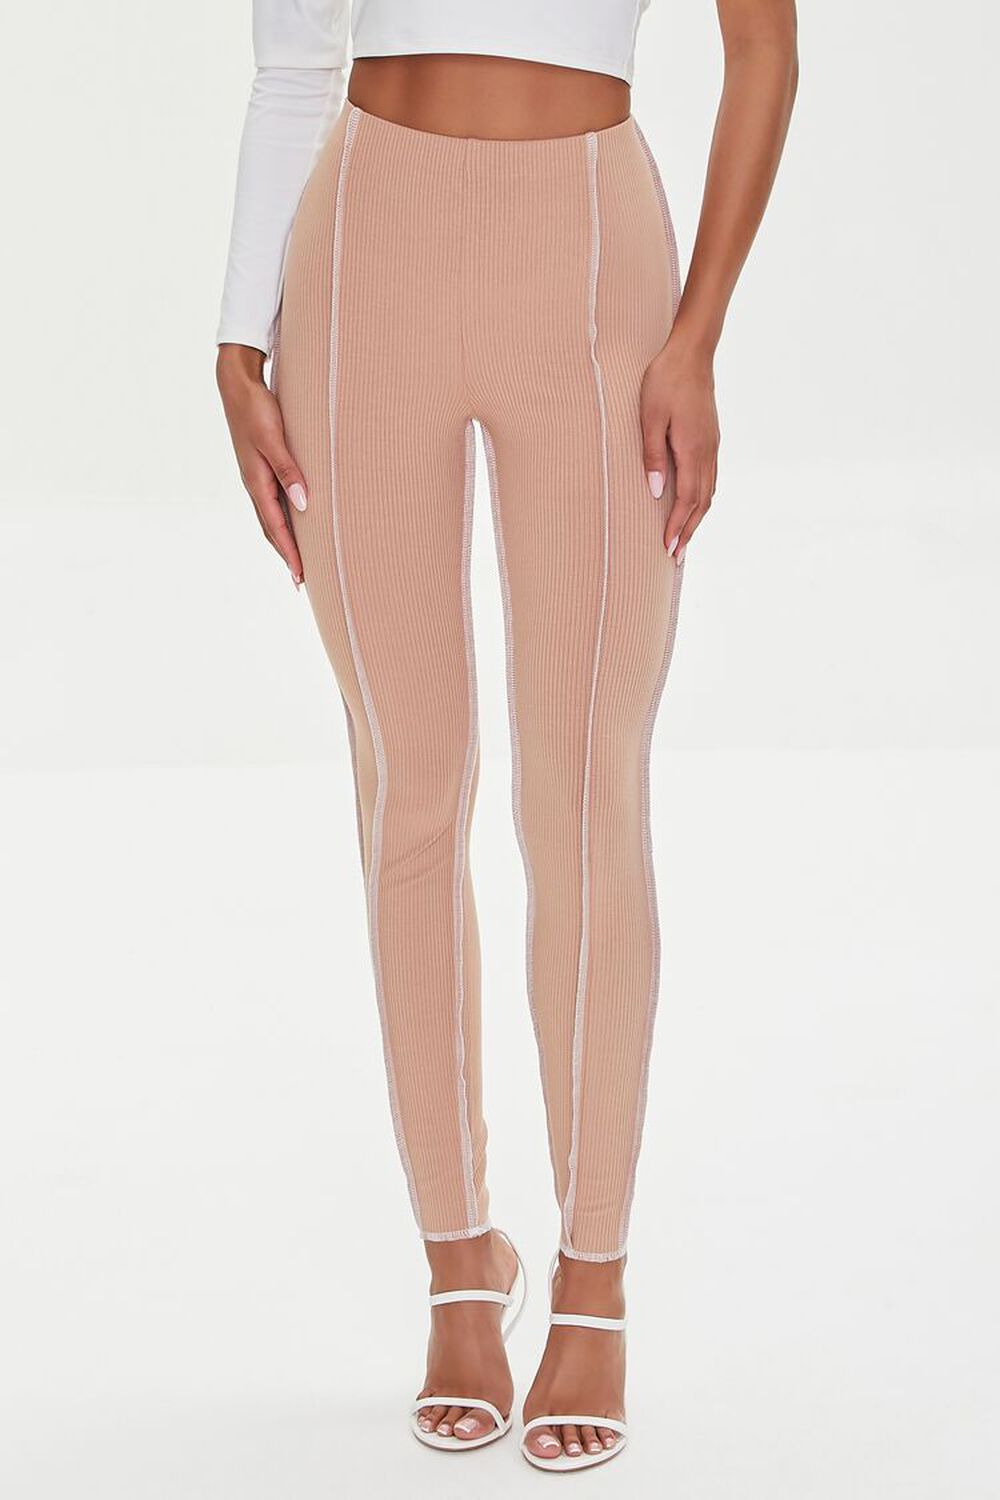 Contrast-Stitch Ribbed Leggings, image 2